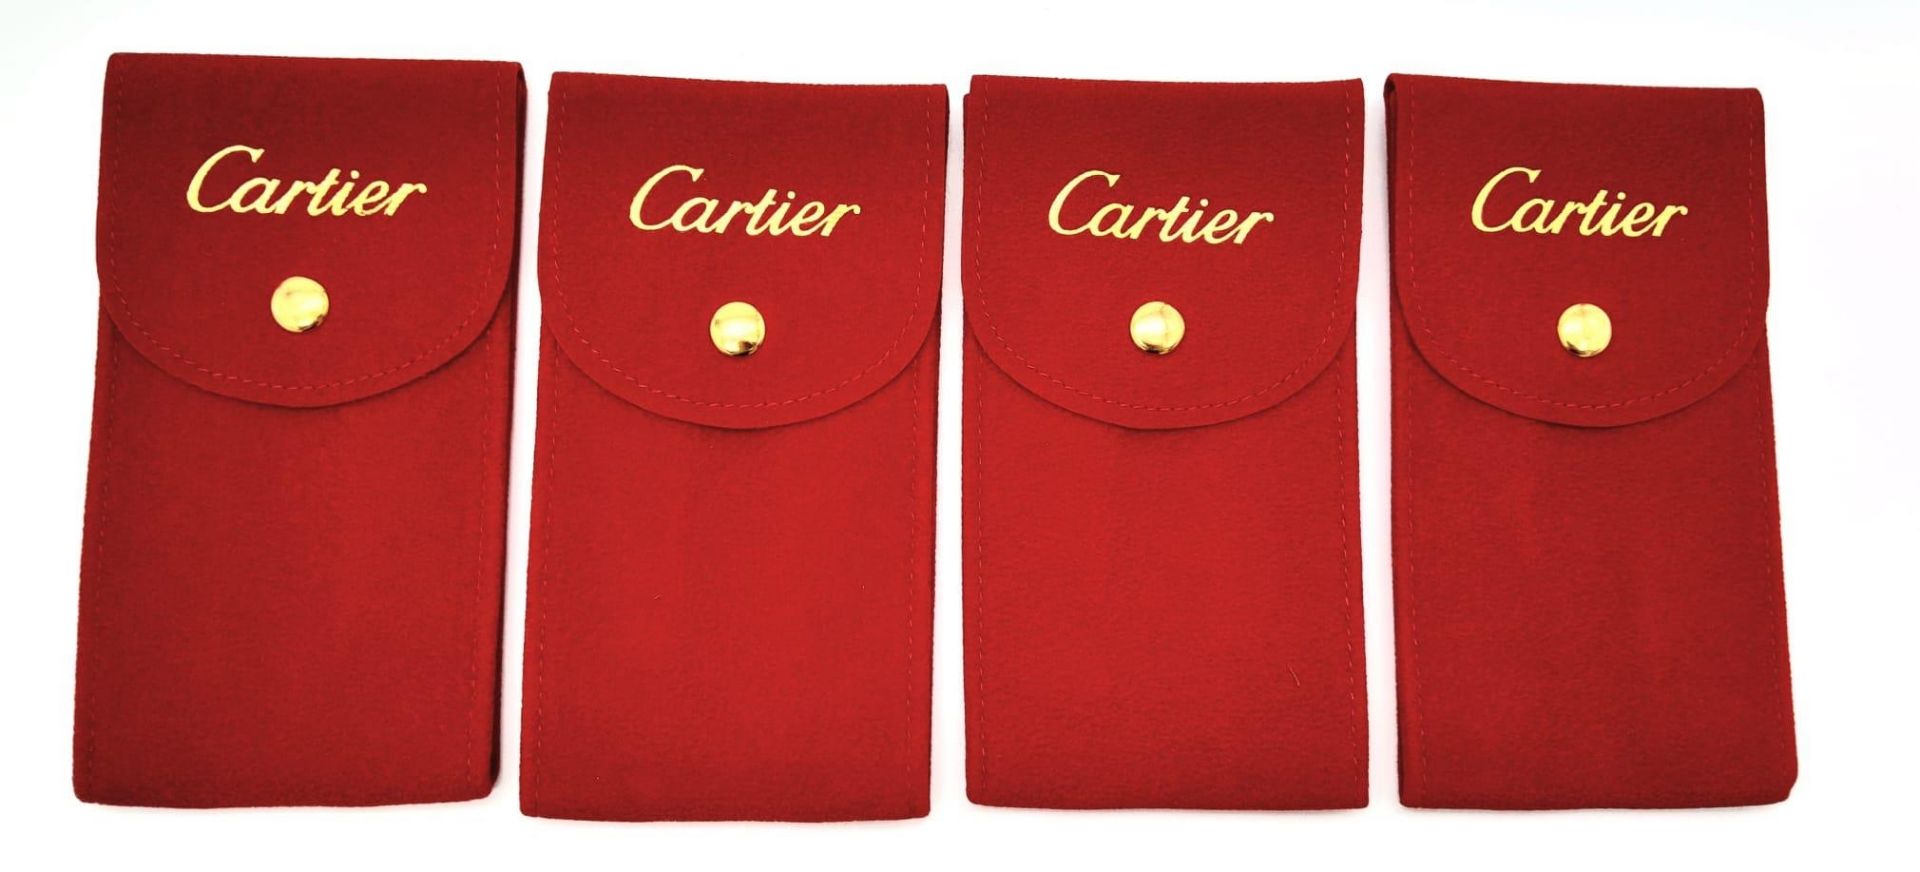 Four CARTIER service pocket pouches, with inserts, ideal for traveling or protecting your valuable